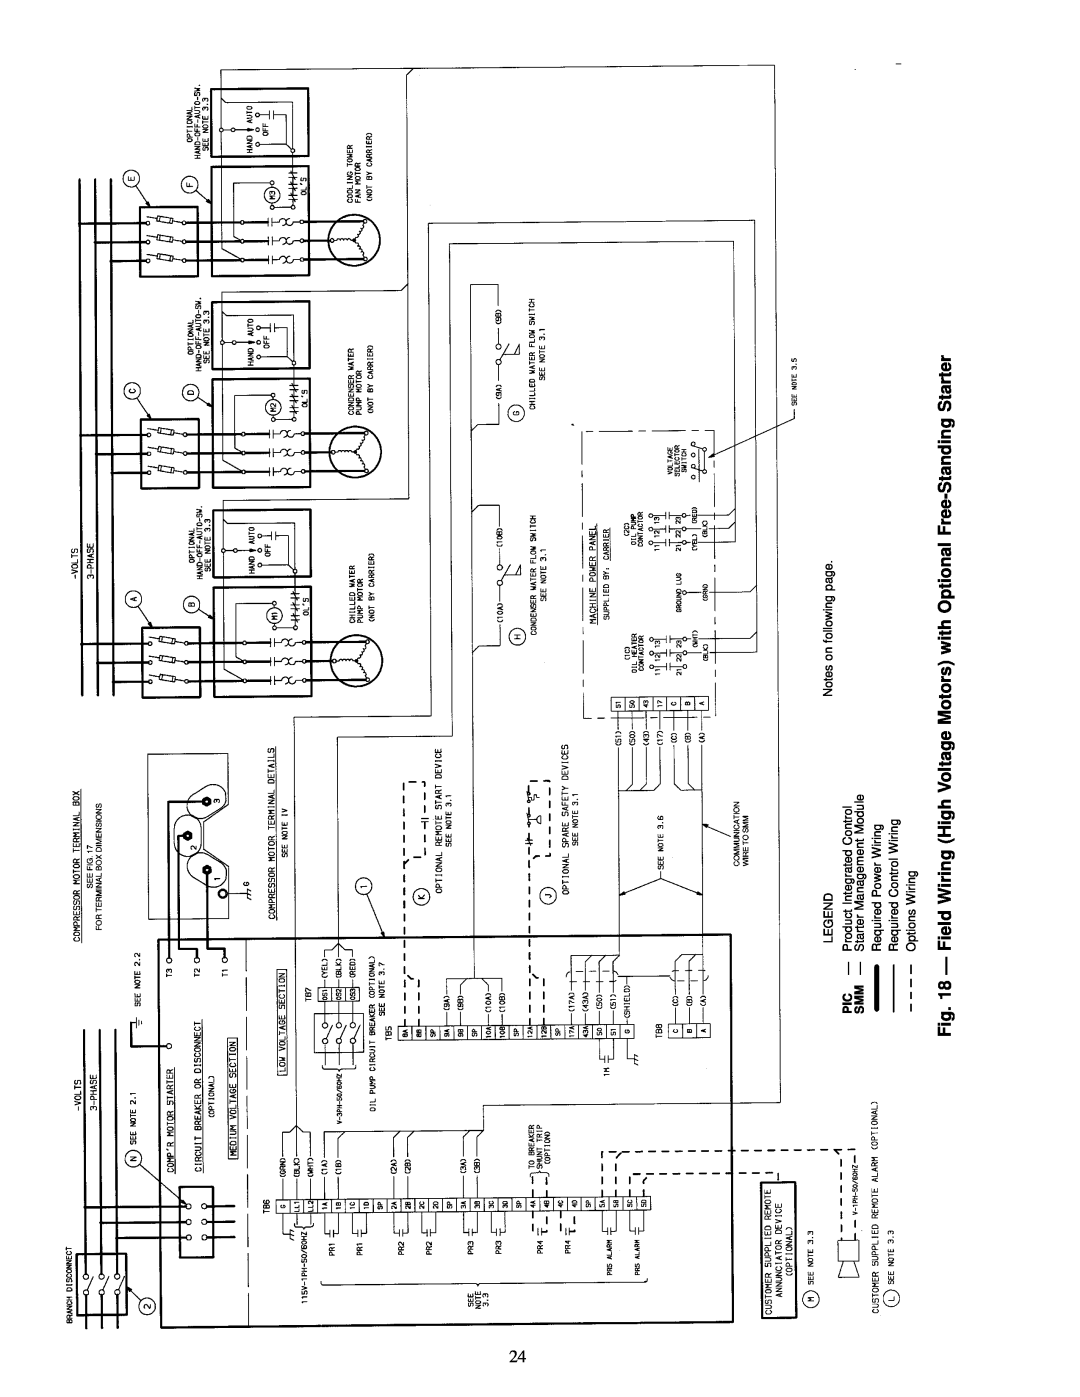 Carrier 19EX Notes on following page, PIC Ð Product Integrated Control, SMM Ð Starter Management Module, Options Wiring 